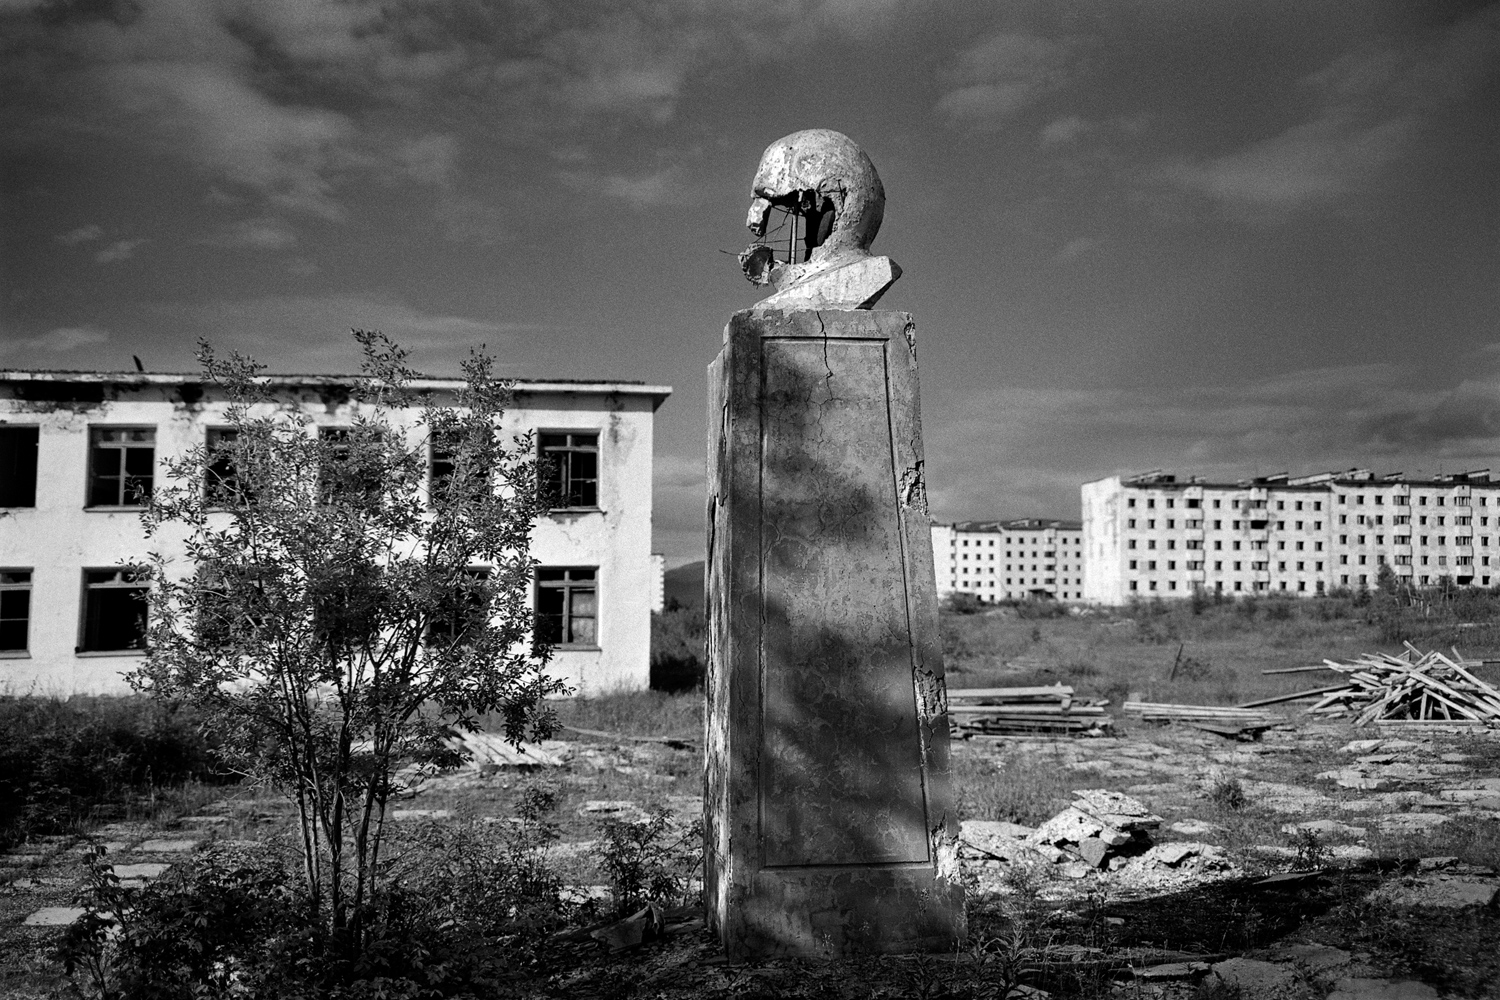 Kadykchan is an abandoned mining ghost-town. The village was built by Gulag prisoners, among whom was the writer Varlam Shalamov. After an explosion at the mine in 1996 Kadykchan was closed. All residents were evicted, houses were cut off from utilities and services, and the private sector was cauterized, so people didn't come back. A bust of Lenin on the central square was shot to pieces by the last residents to abandon their homes.